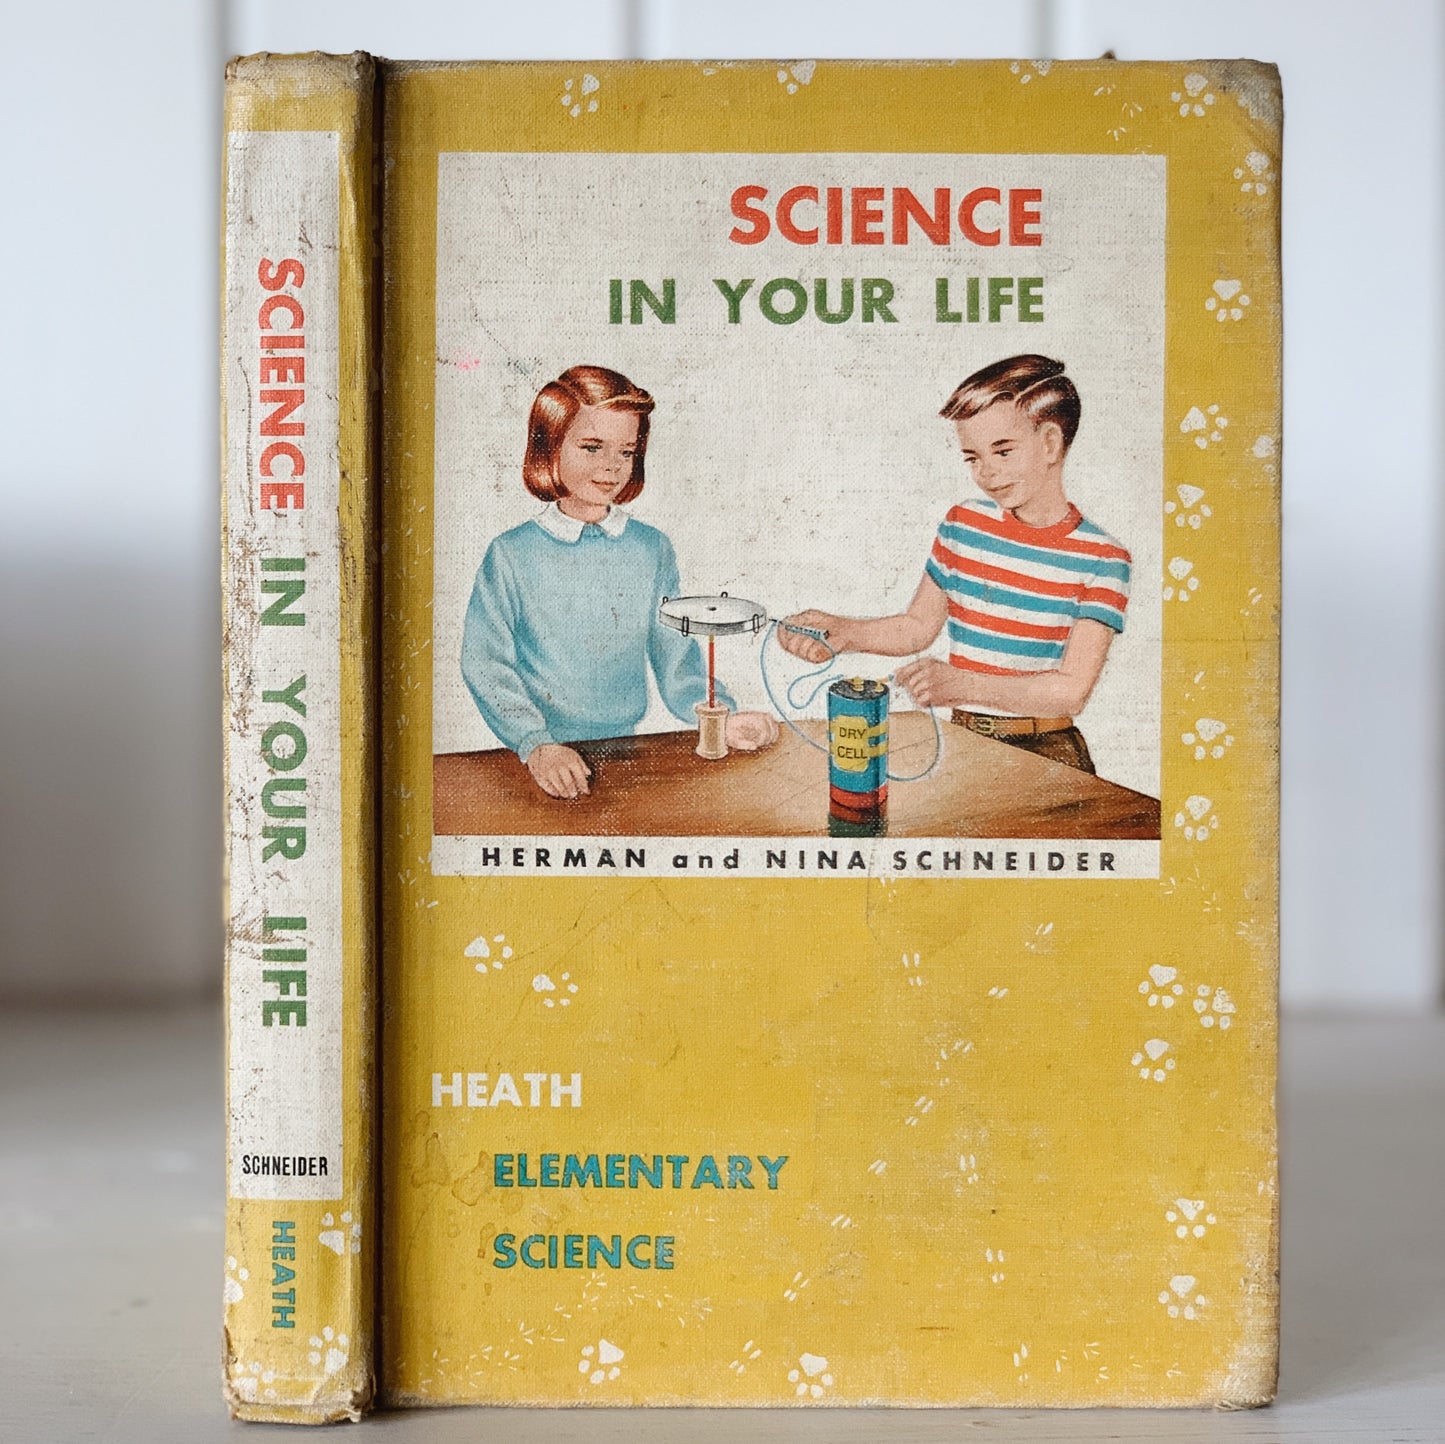 Science In Your Life, Heath Elementary Science, Alabama Edition, 1955